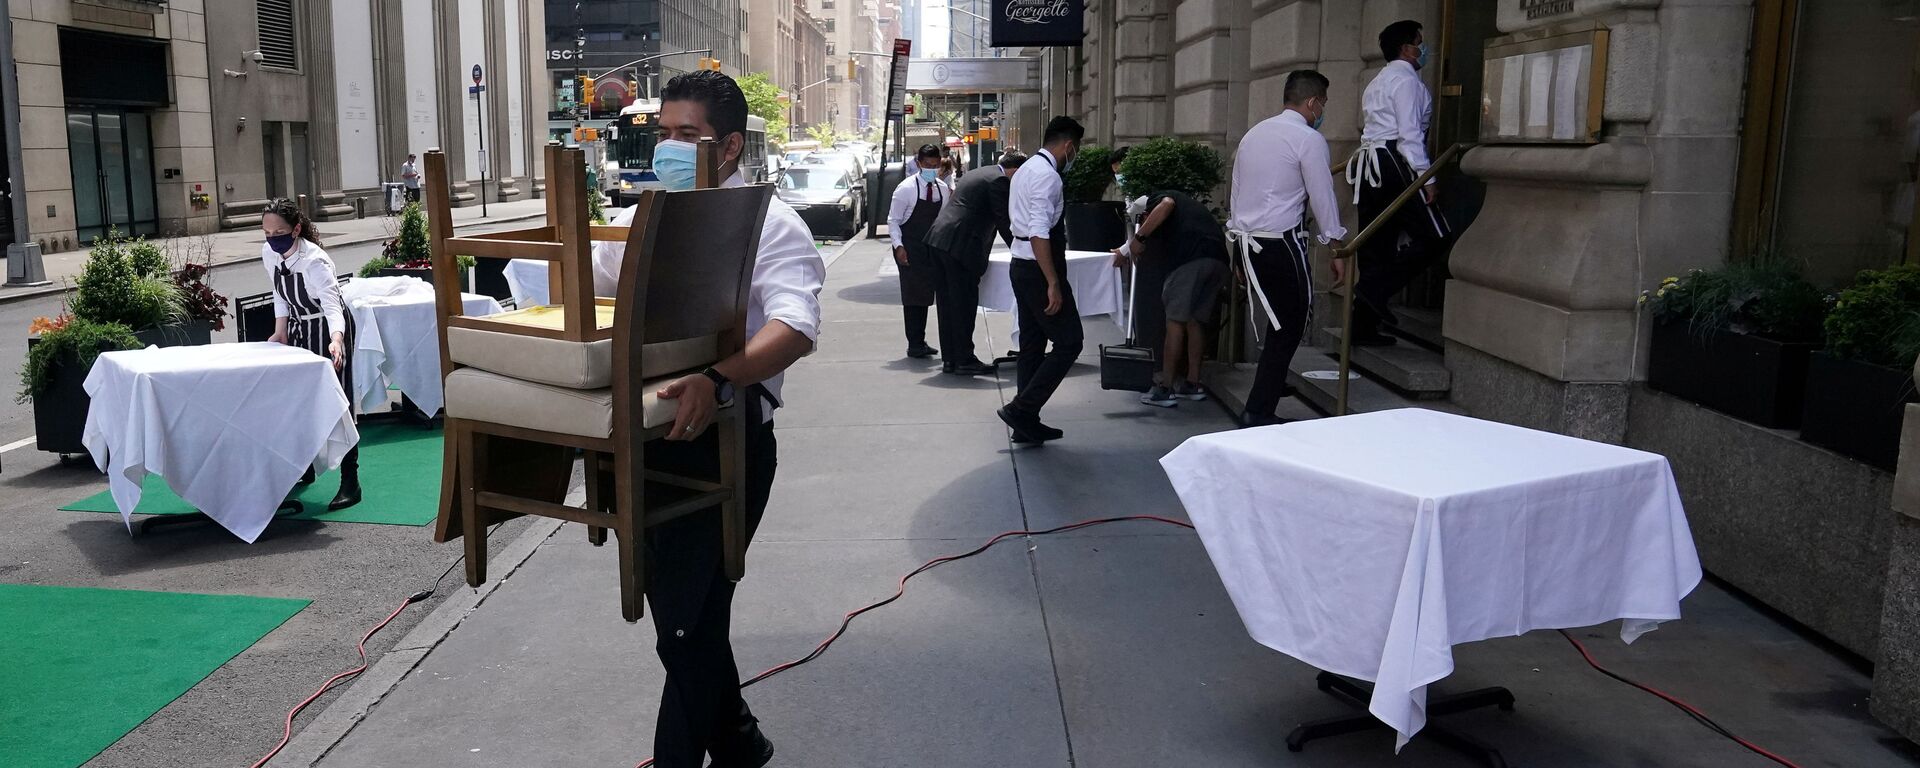 FILE PHOTO: A waiter sets up tables in front of a restaurant on a street on the first day of the phase two re-opening of businesses following the outbreak of the coronavirus disease (COVID-19), in the Manhattan borough of New York City, New York, U.S., June 22, 2020.  - Sputnik International, 1920, 03.08.2021